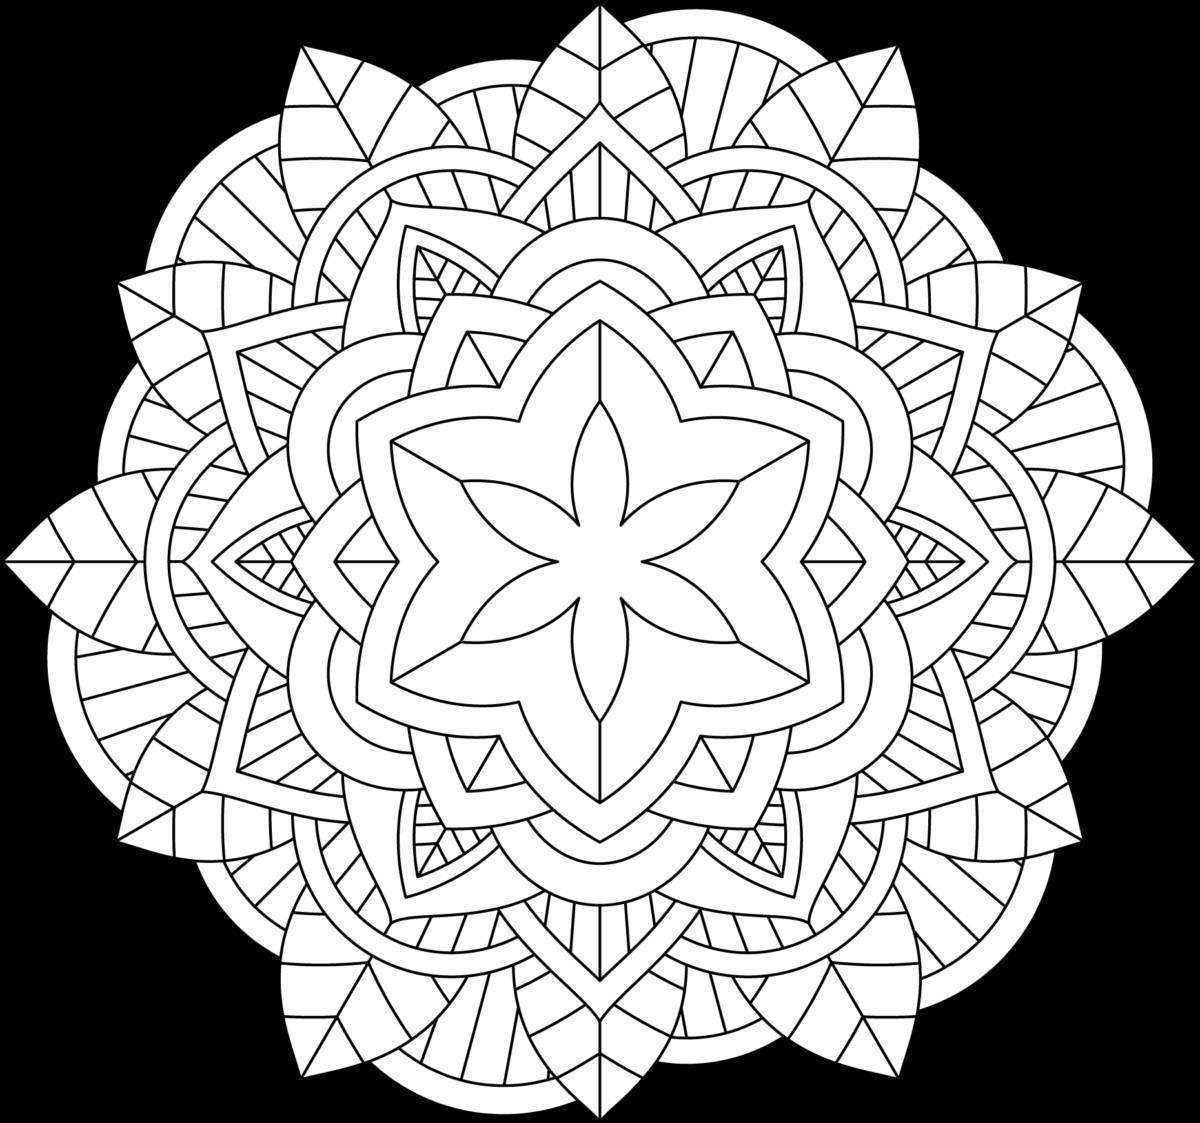 Adorable mandala coloring pages for 5-6 year olds